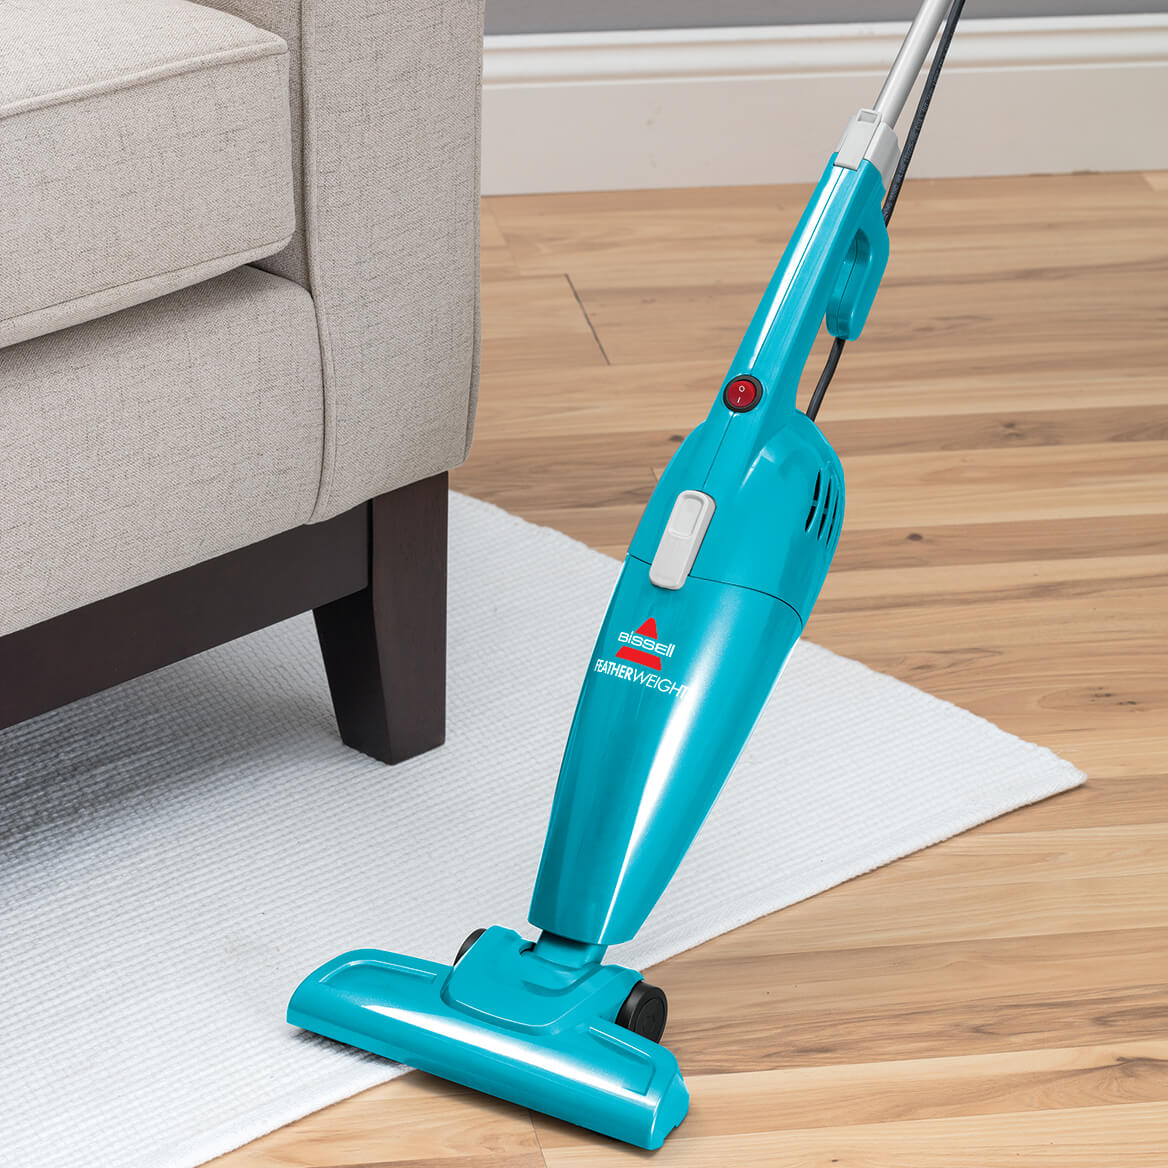 Bissell Featherweight Stick Lightweight Bagless Vacuum Vacuums & Electric Broom in Teal, BSL2033 - image 2 of 3